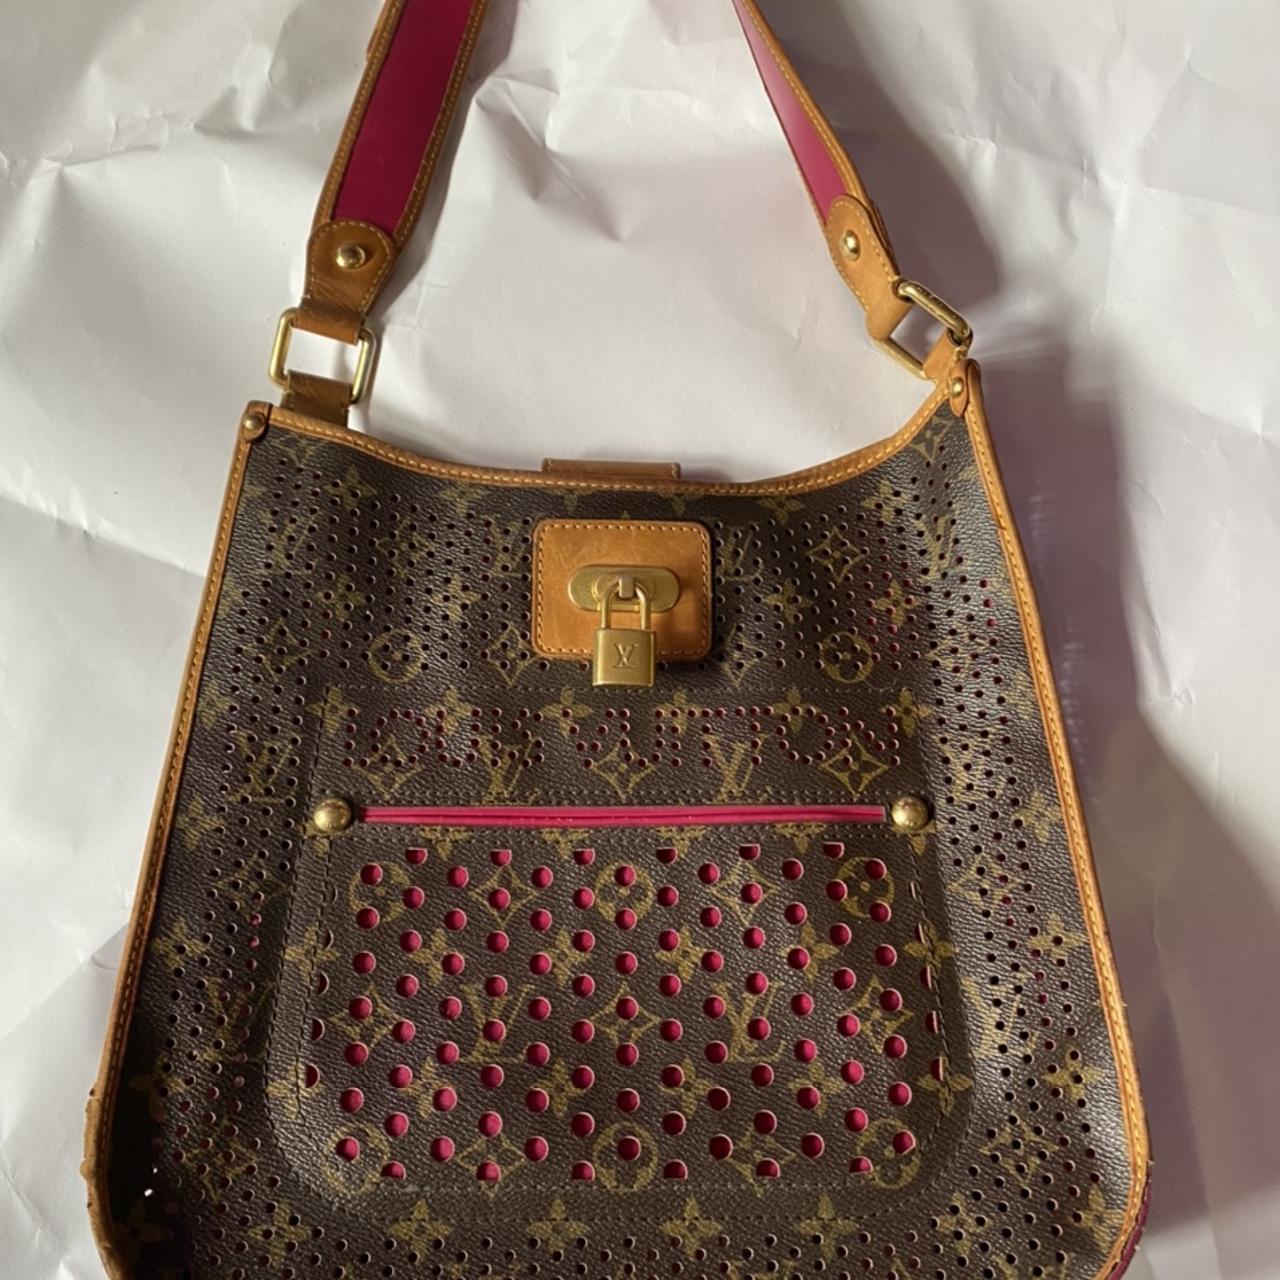 Louis Vuitton Musette Perforated